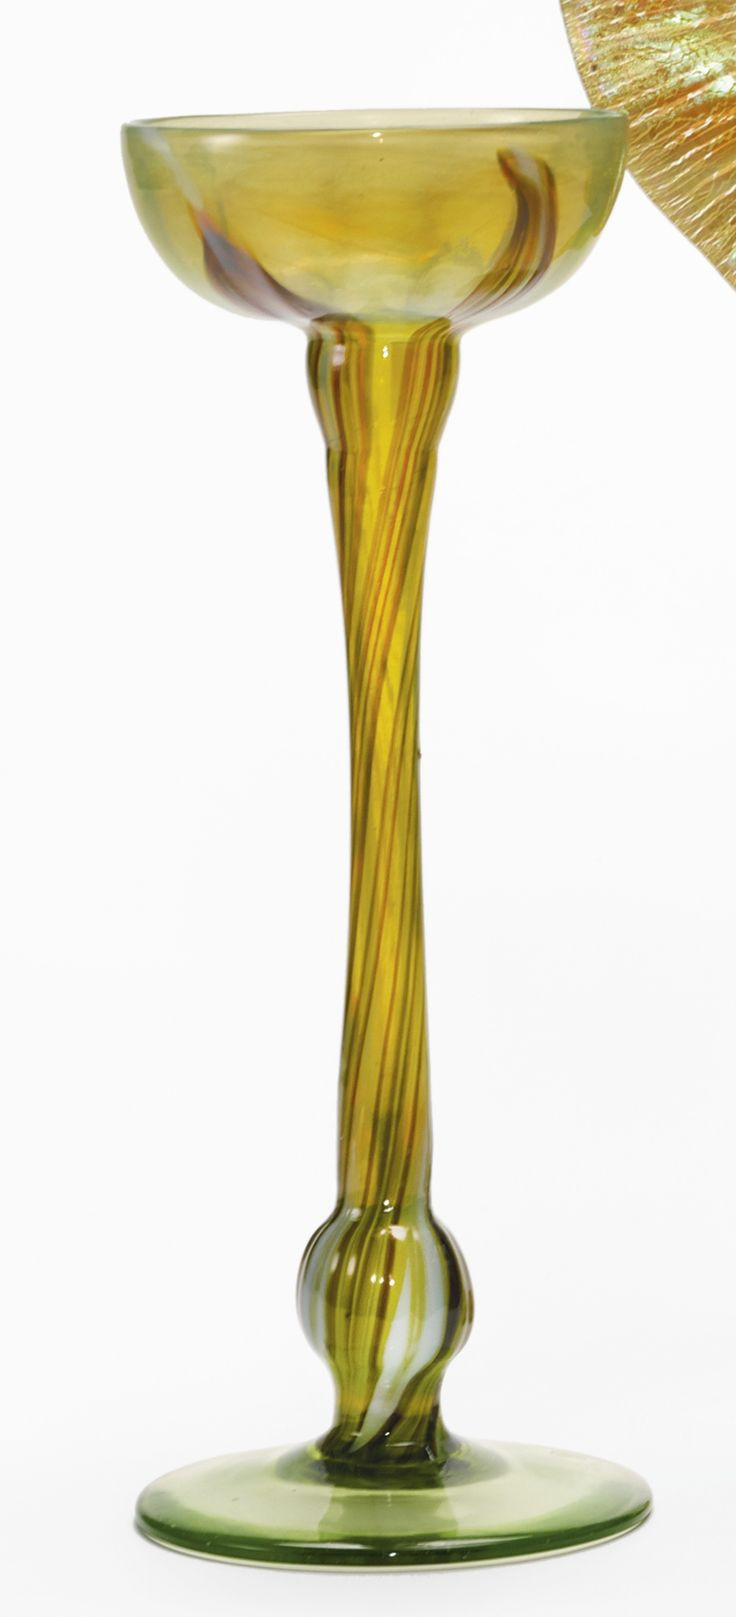 20 Spectacular Tiffany Tulip Vase 2024 free download tiffany tulip vase of 248 best tiffany images on pinterest louis comfort tiffany with tiffany studios an early flower form vase